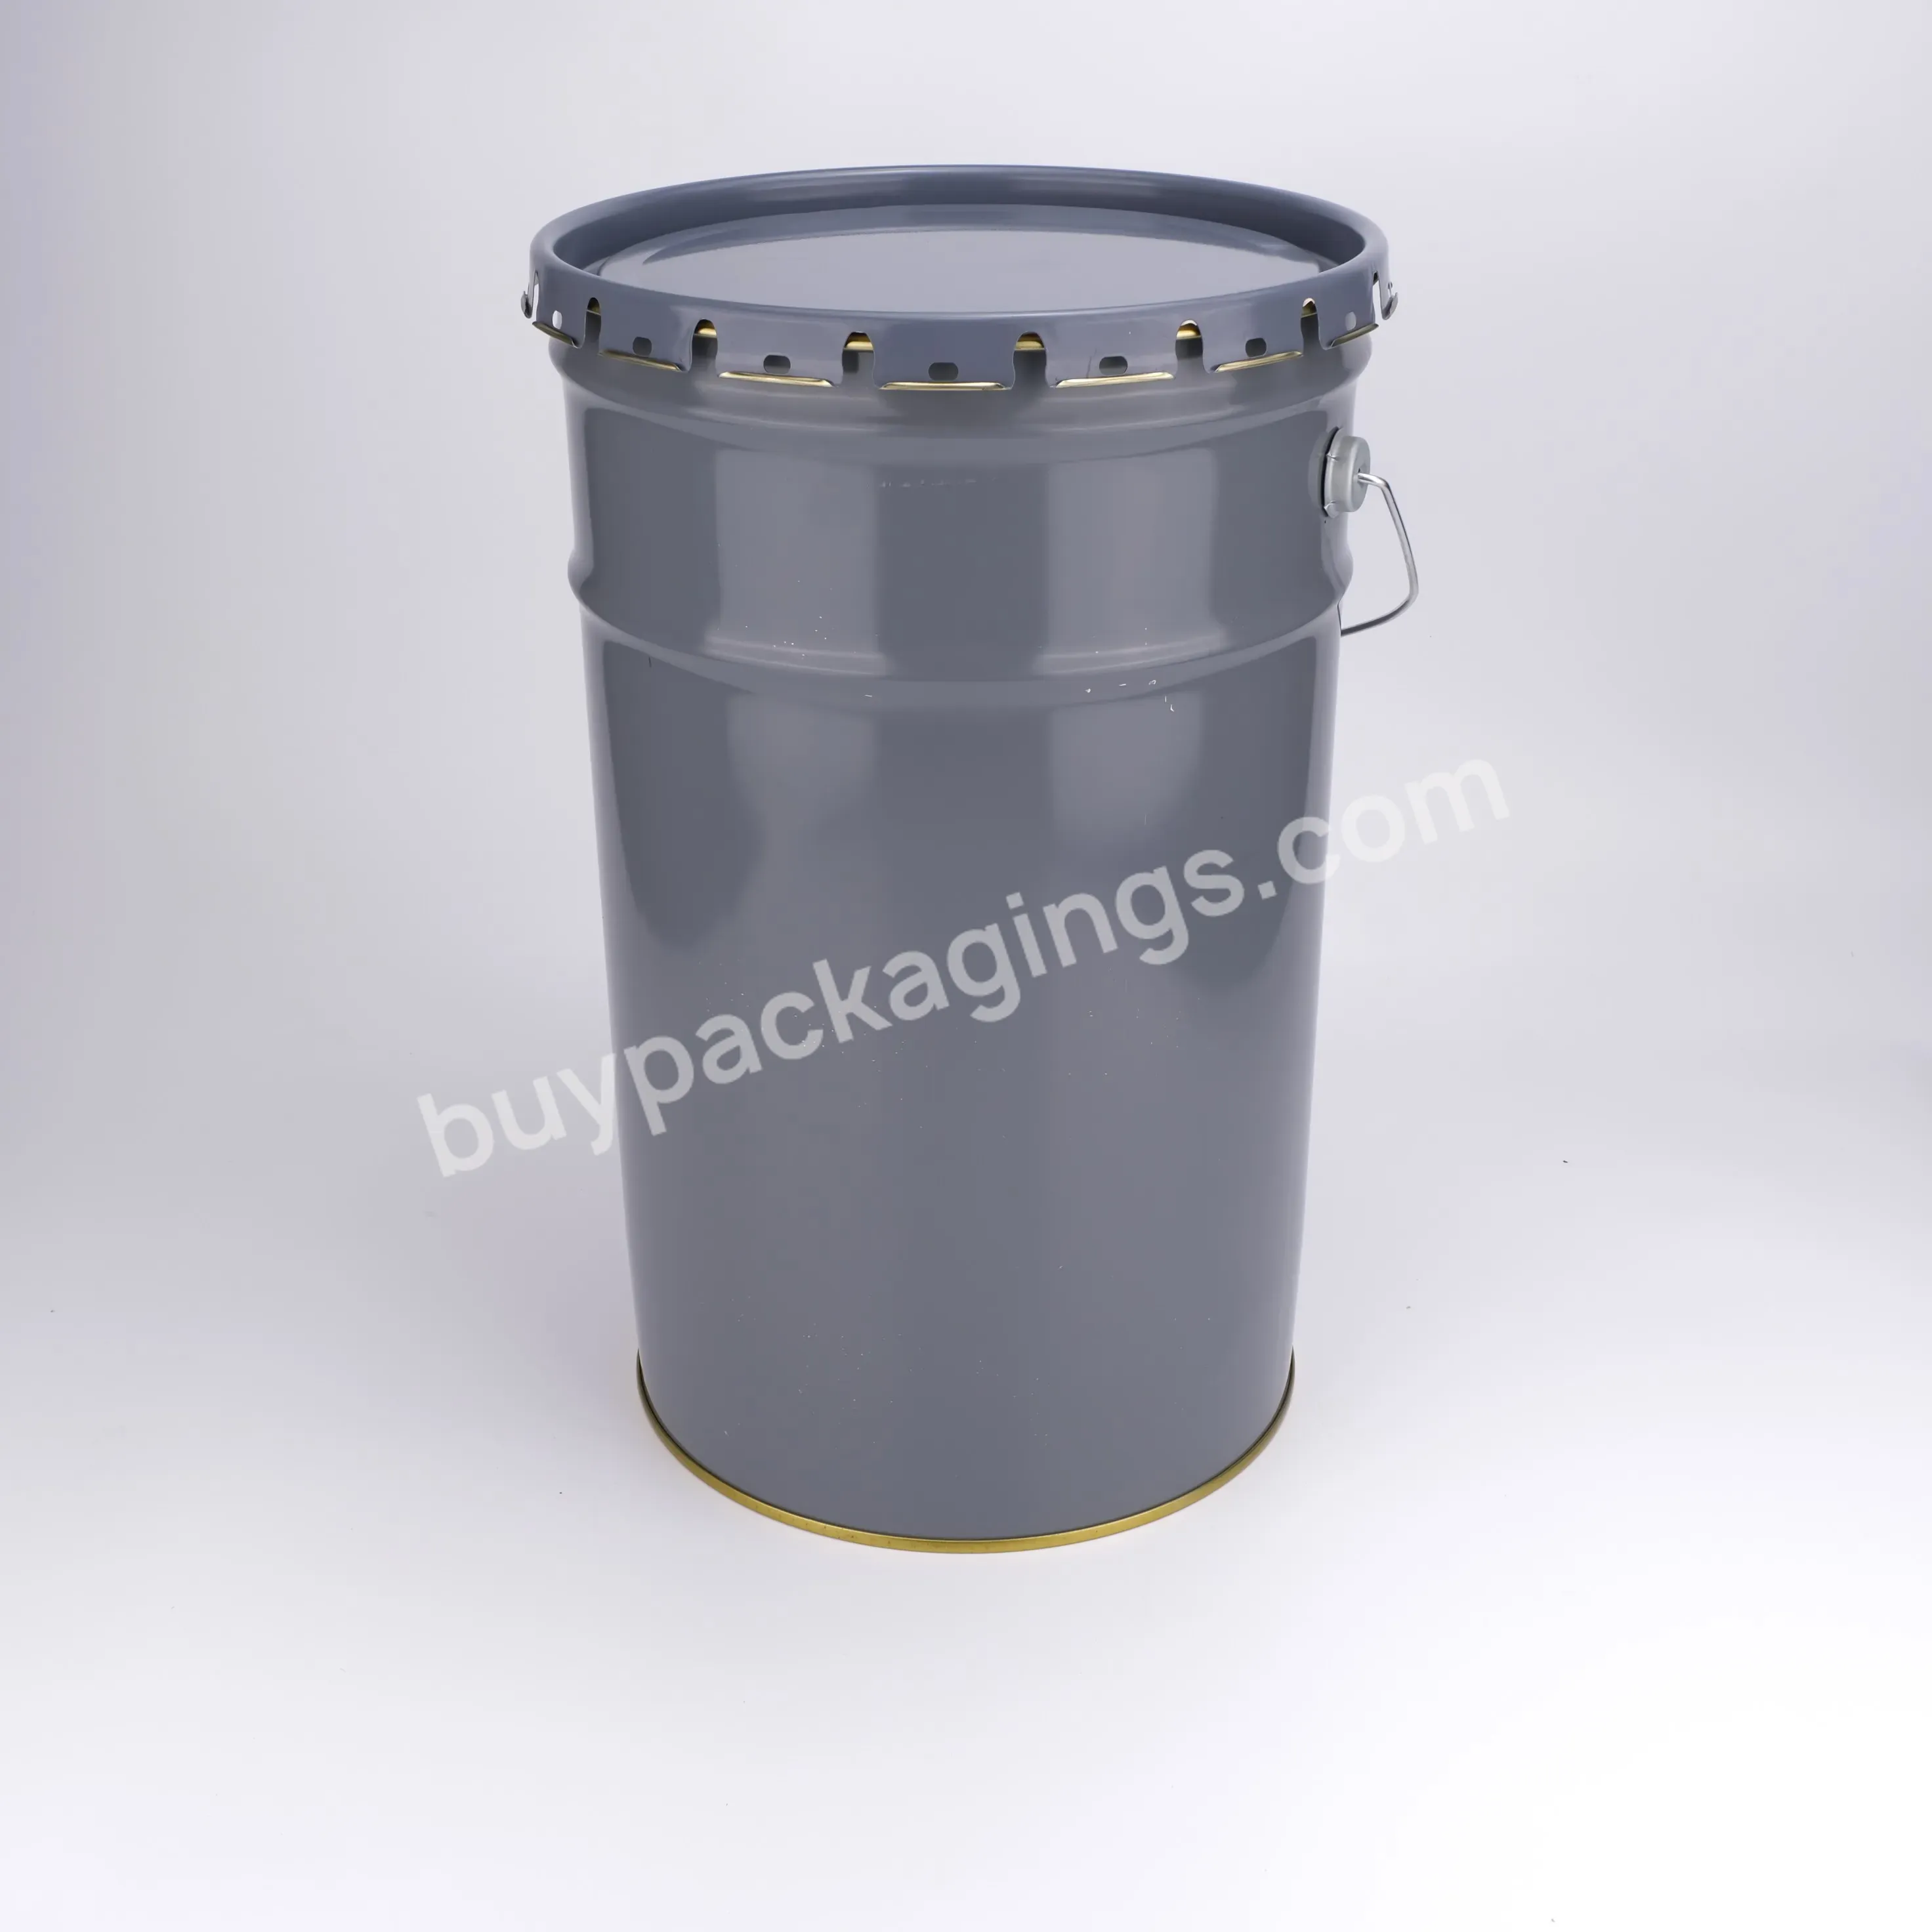 25 Litres Open Head Chemical Steel Drums With Flower Lug Lid For Paint Thinner Supplier Manufacturers Sale Price - Buy Open Head Chemical Steel Drums,25 Litres Steel Drums,Paint Thinner Steel Drums.